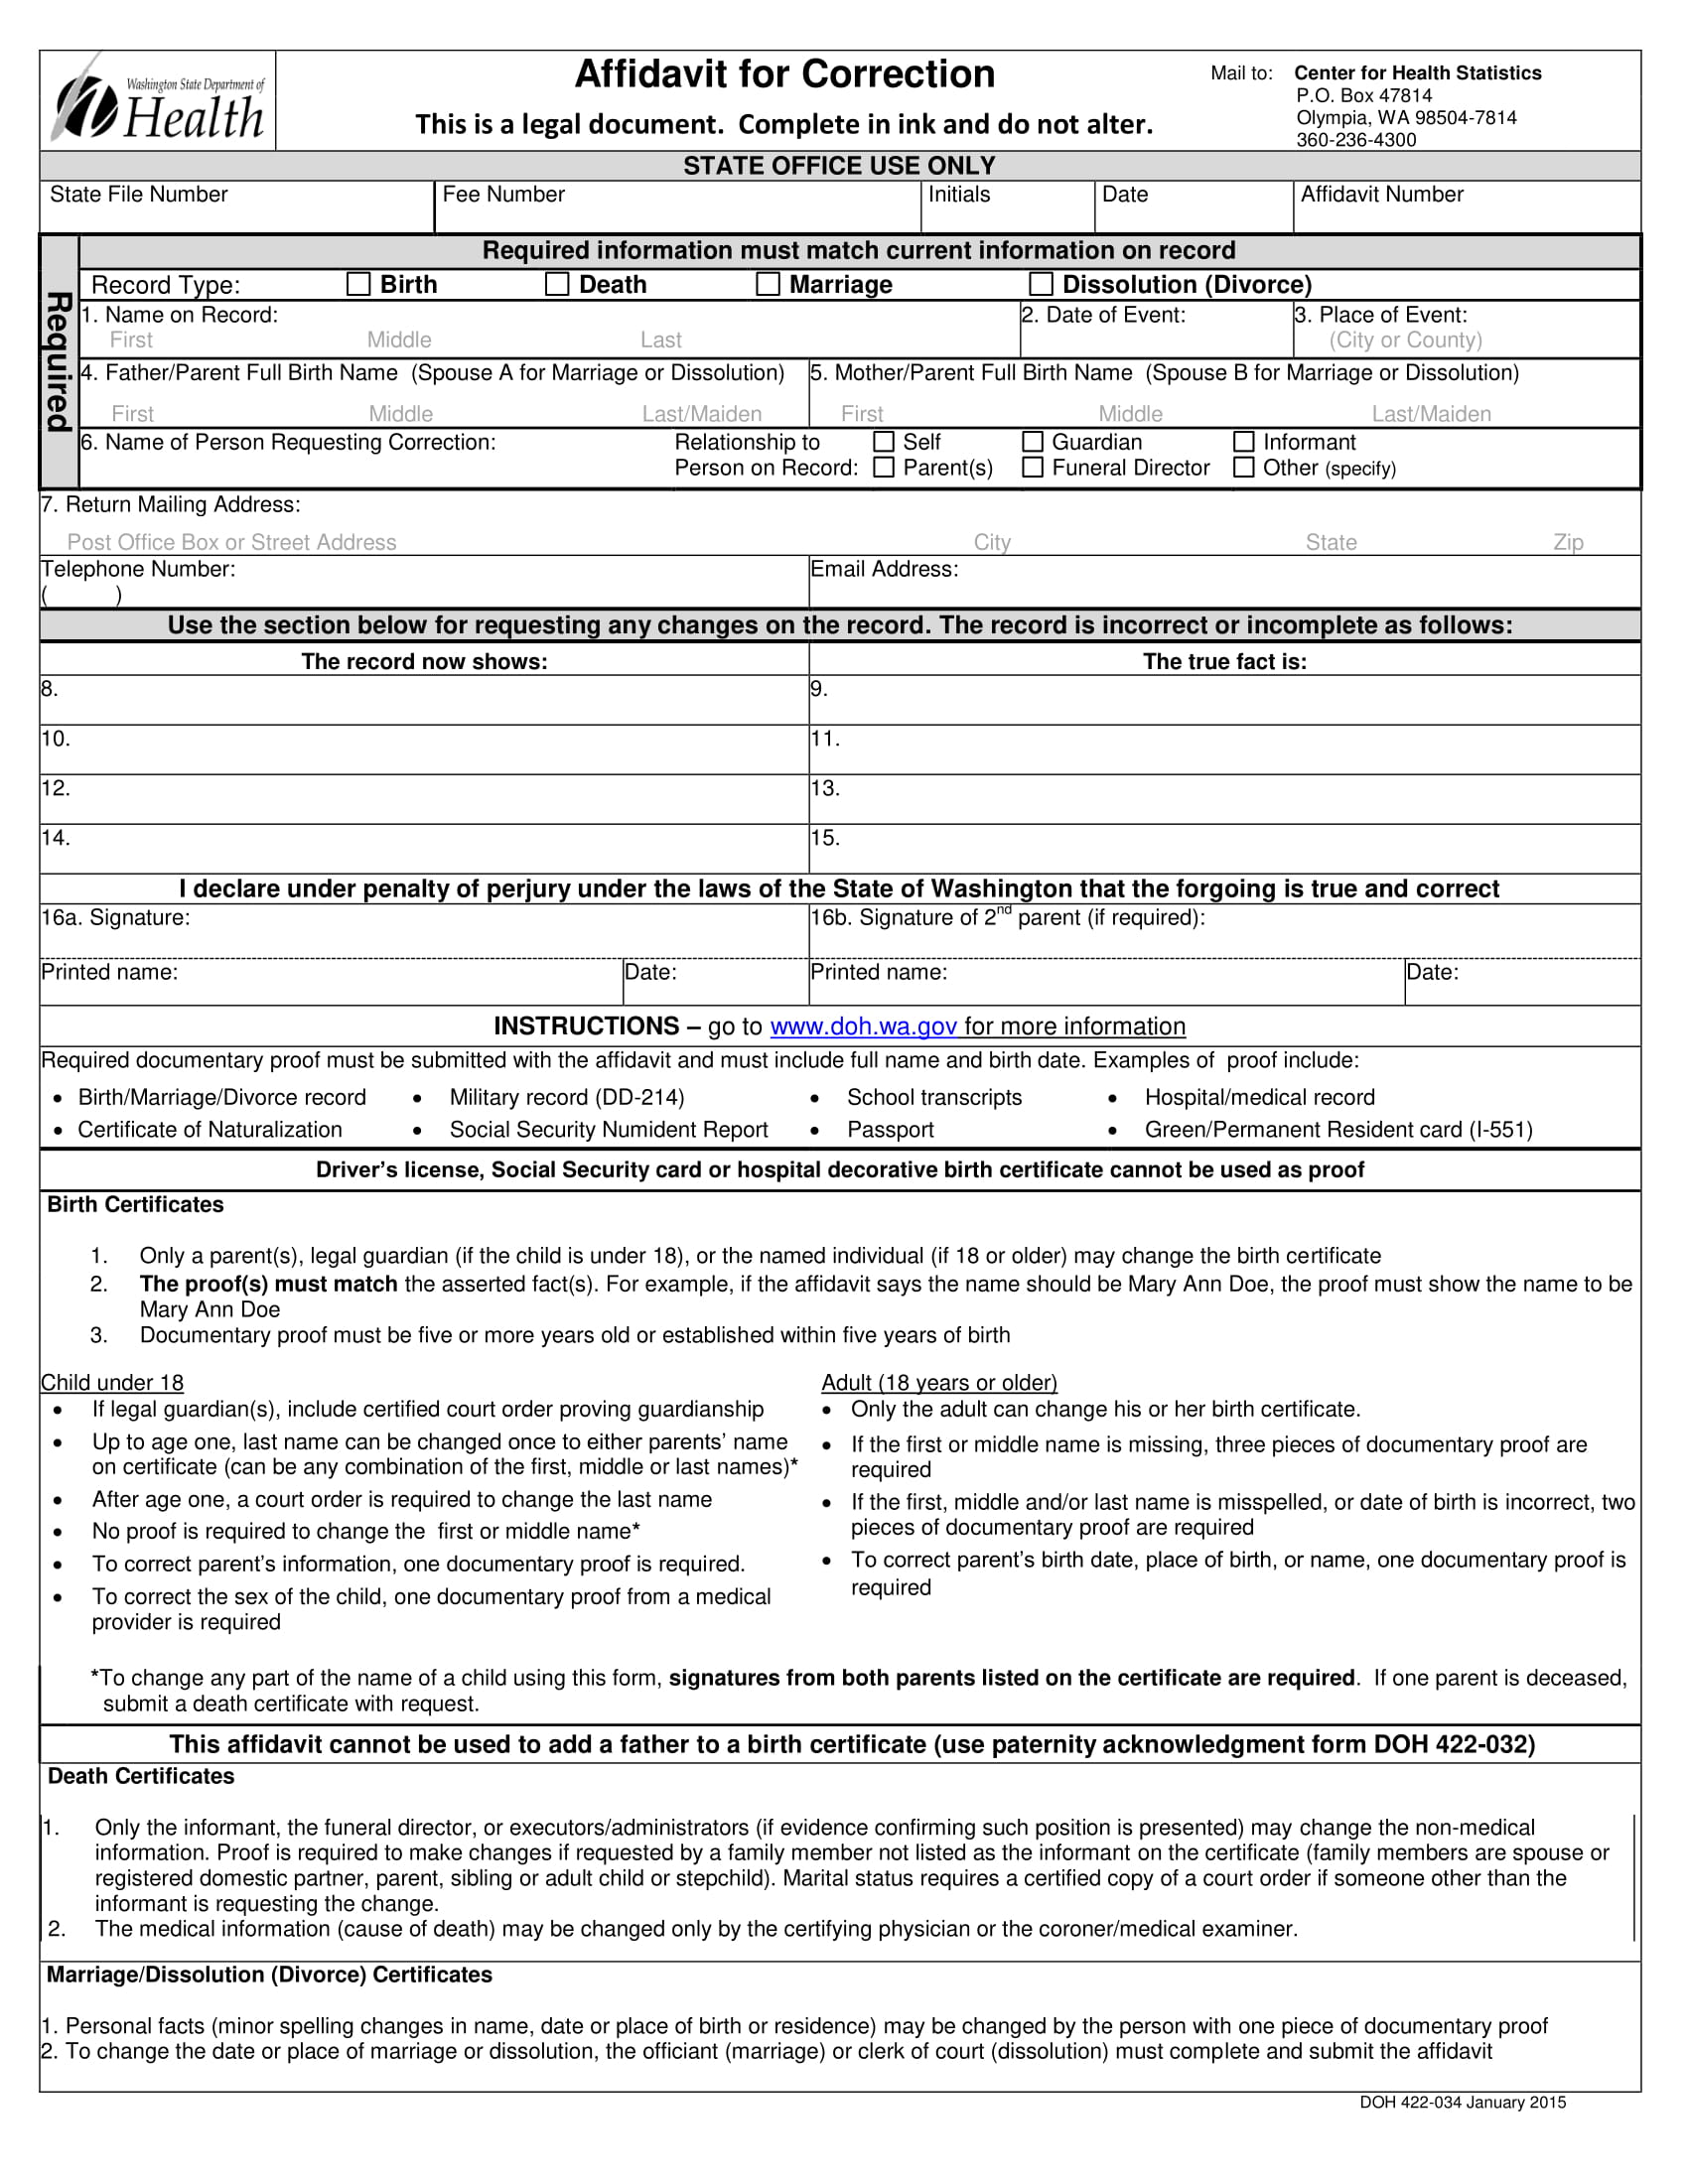 correction request form 1